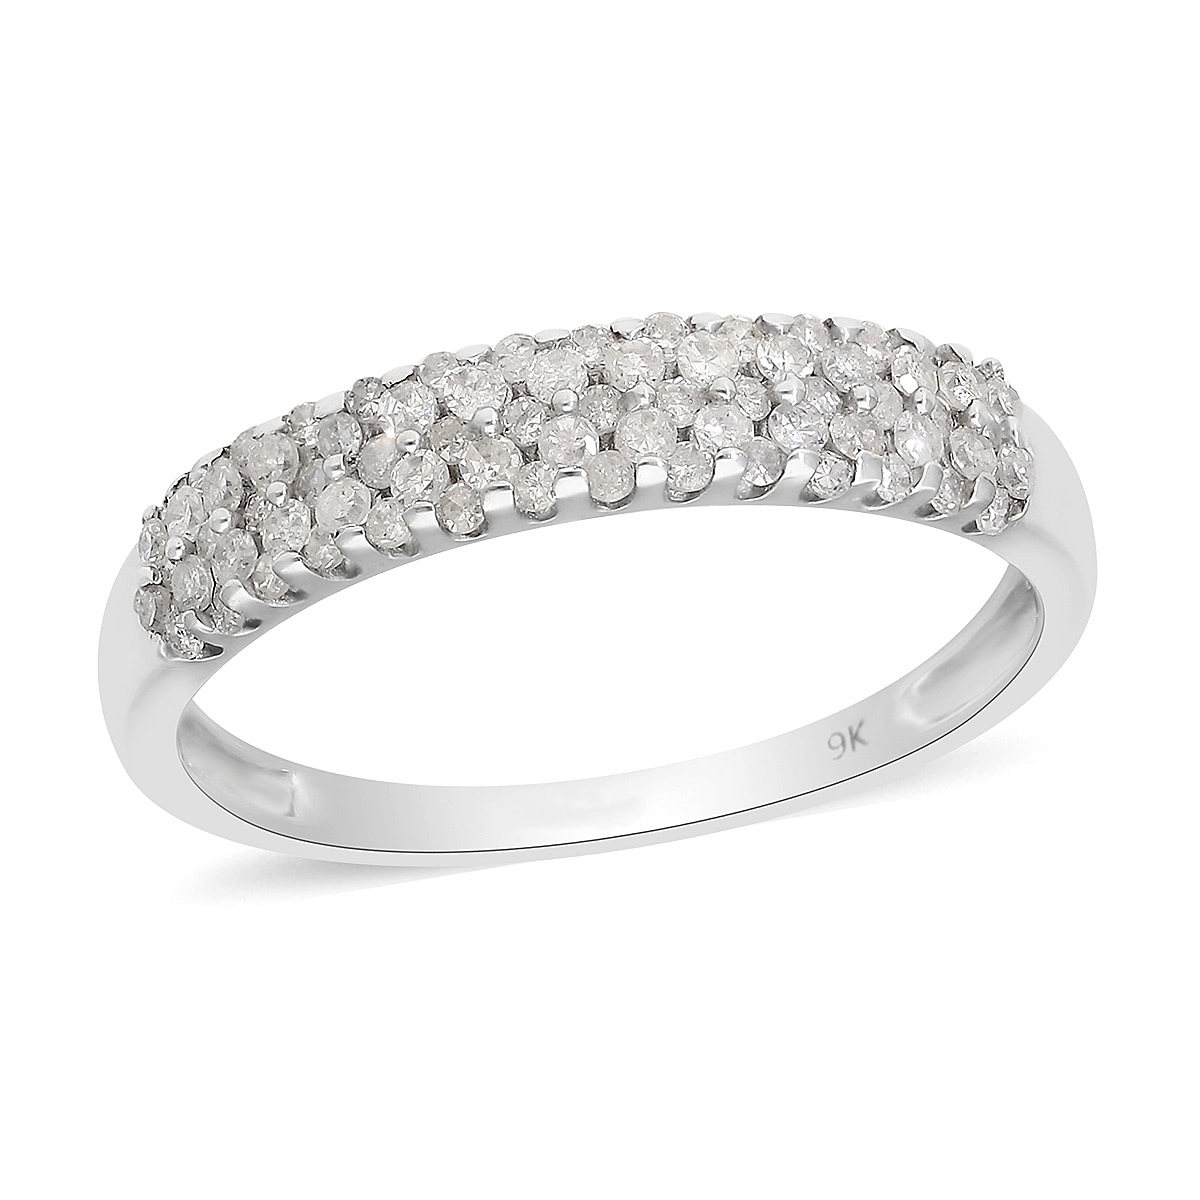 0.50 Ct. SGL Certified Diamond I3/G-H Band Ring in 9K White Gold